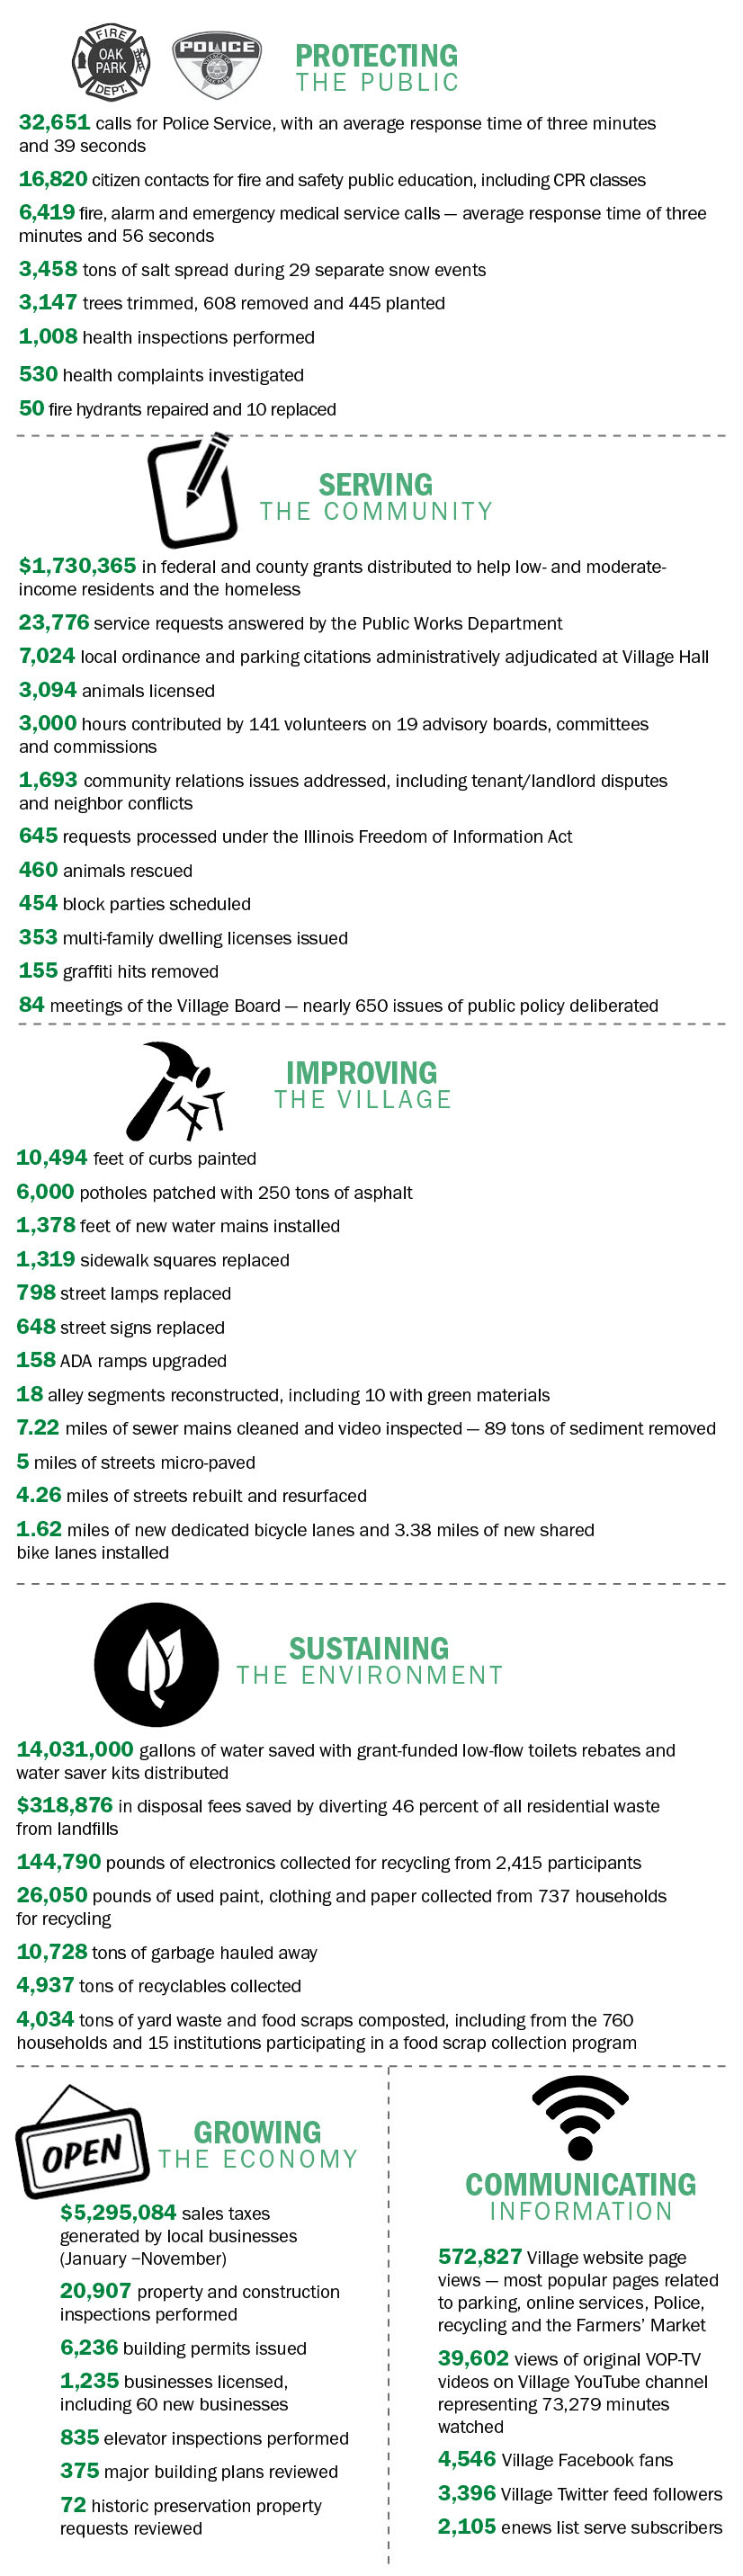 infographic of munipal service deliver in 2014